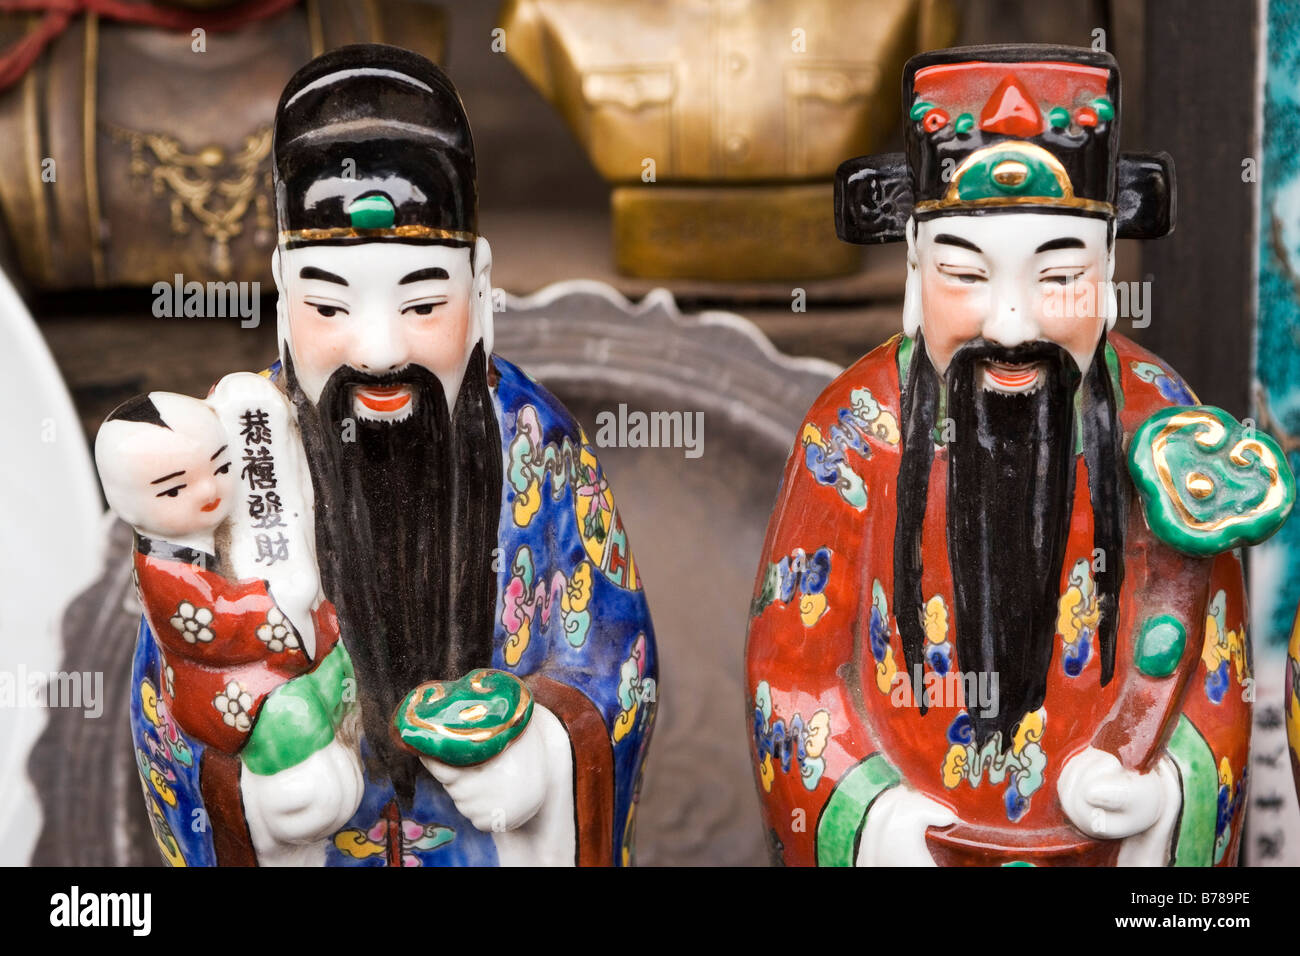 Porcelain Confucius figures are sold on a market stall in the Chinese city of Pingyao in Shanxi Province. Stock Photo